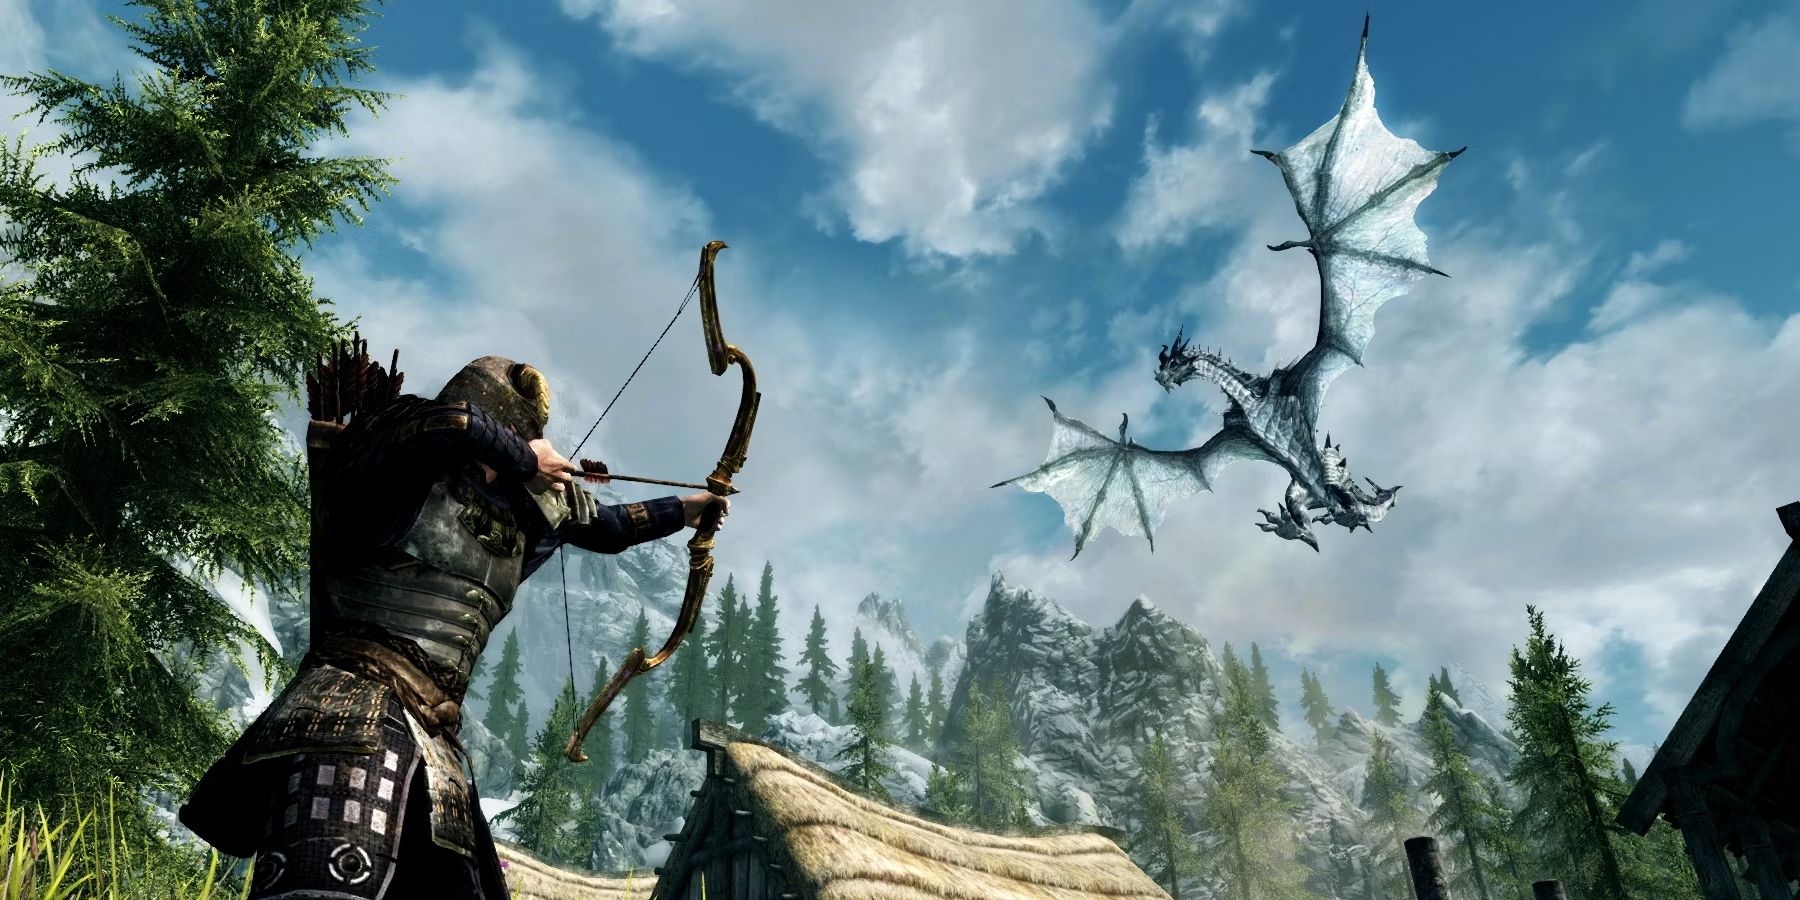 A screenshot from Skyrim showing the Dragonborn aiming a bow at a dragon.